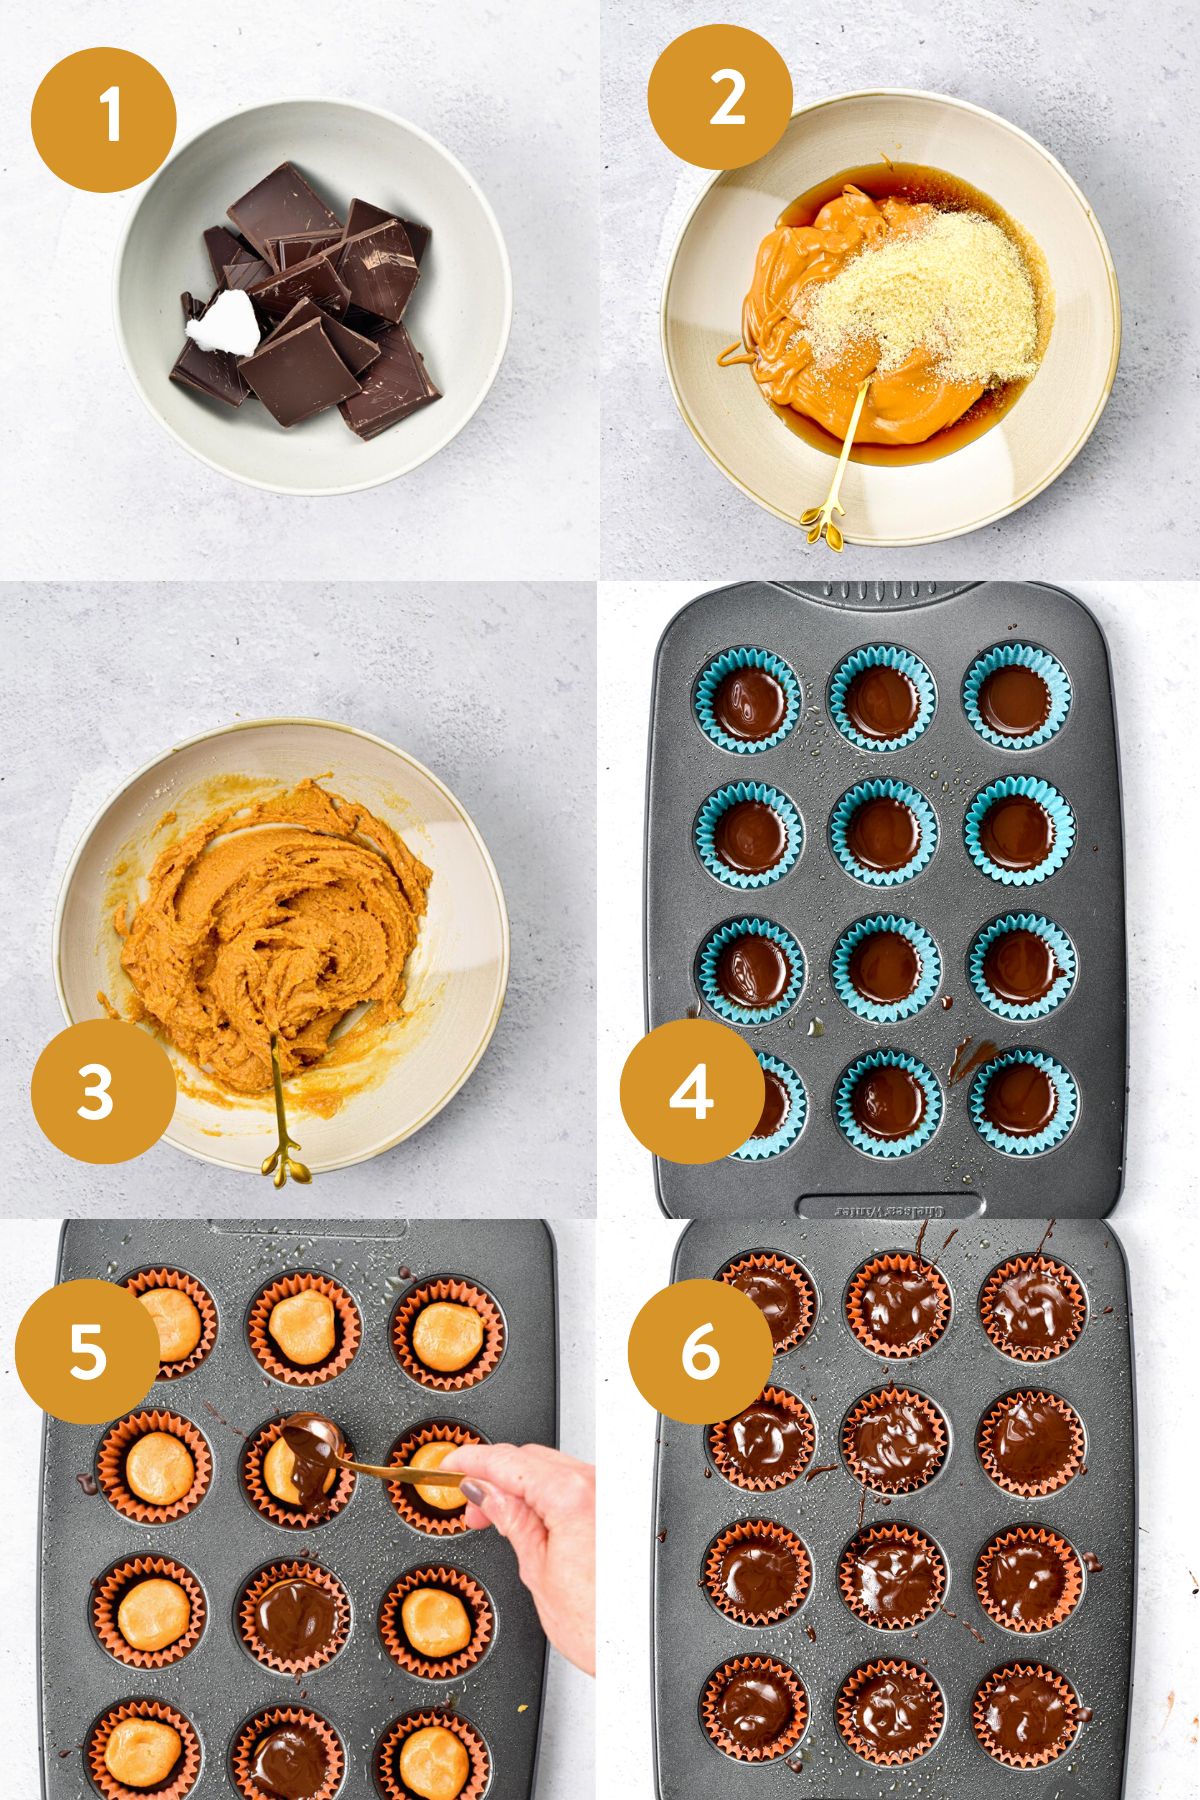 How to make Vegan Peanut Butter Cups